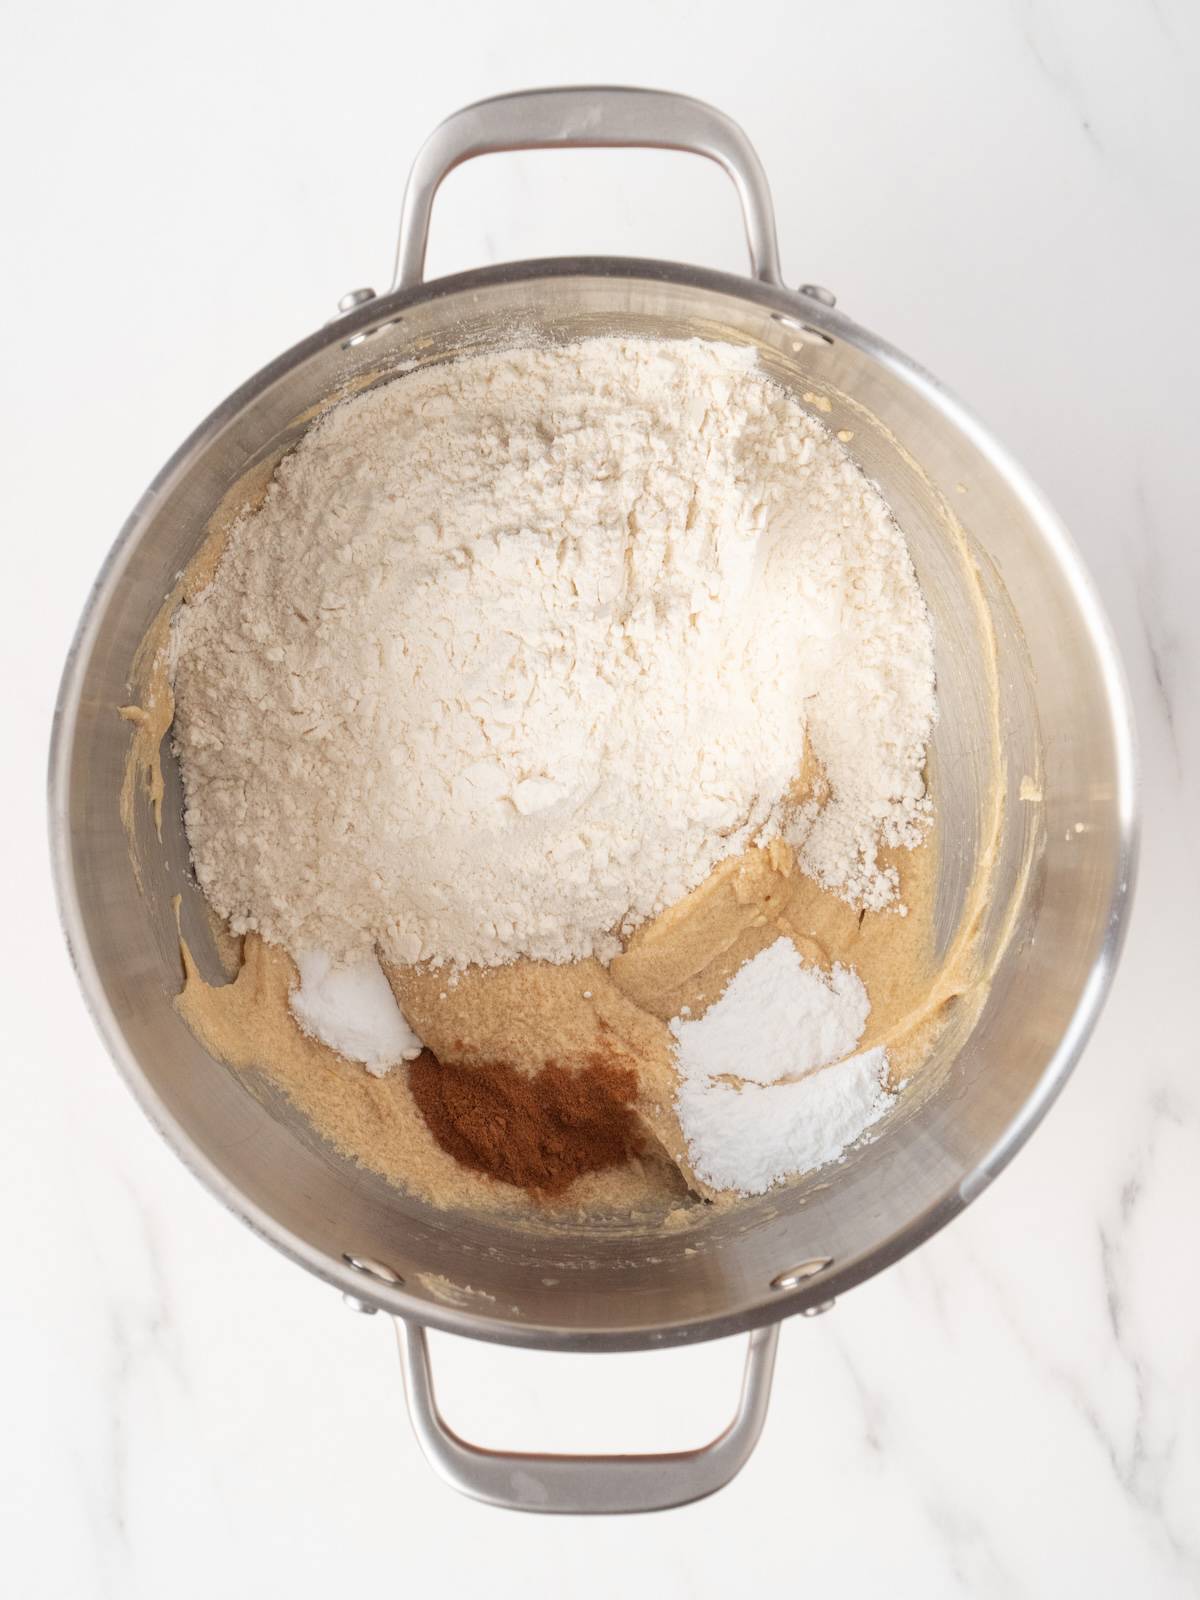 A stand mixer bowl with wet ingredients mixed into a batter, topped with flour, baking powder, baking soda and cinnamon.